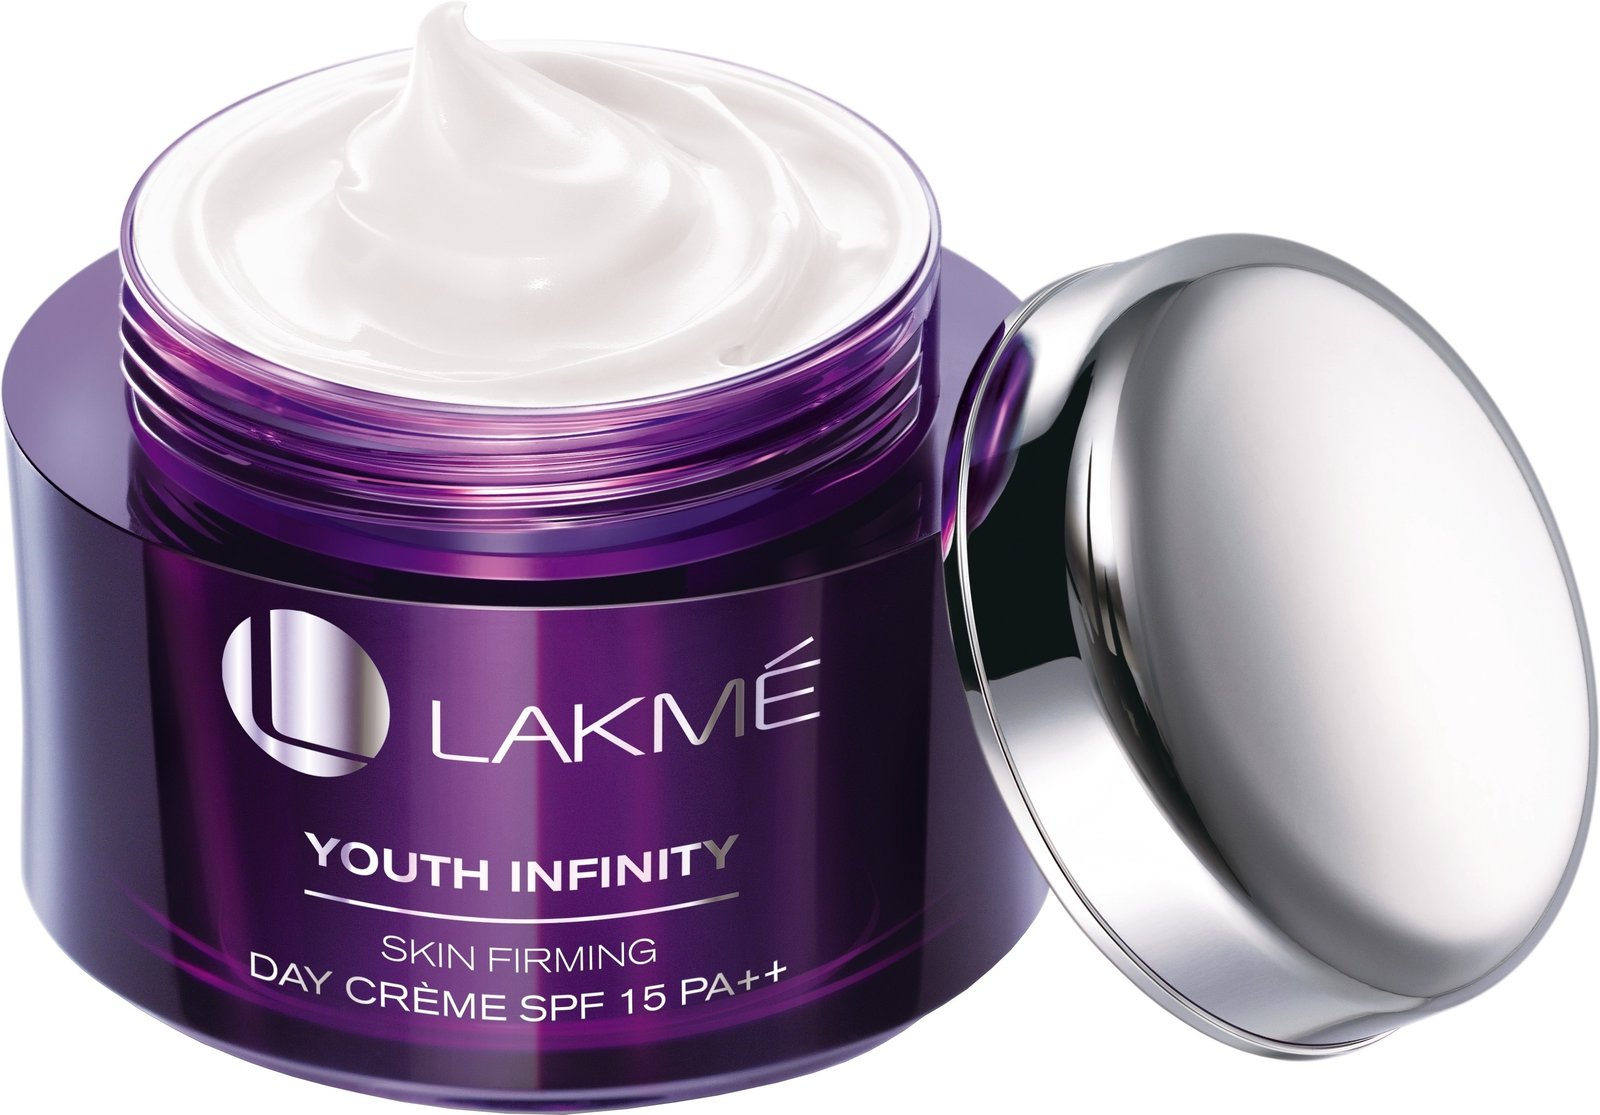 Lakme Youth Infinity Skin Firming Day Creme SPF 15 PA++